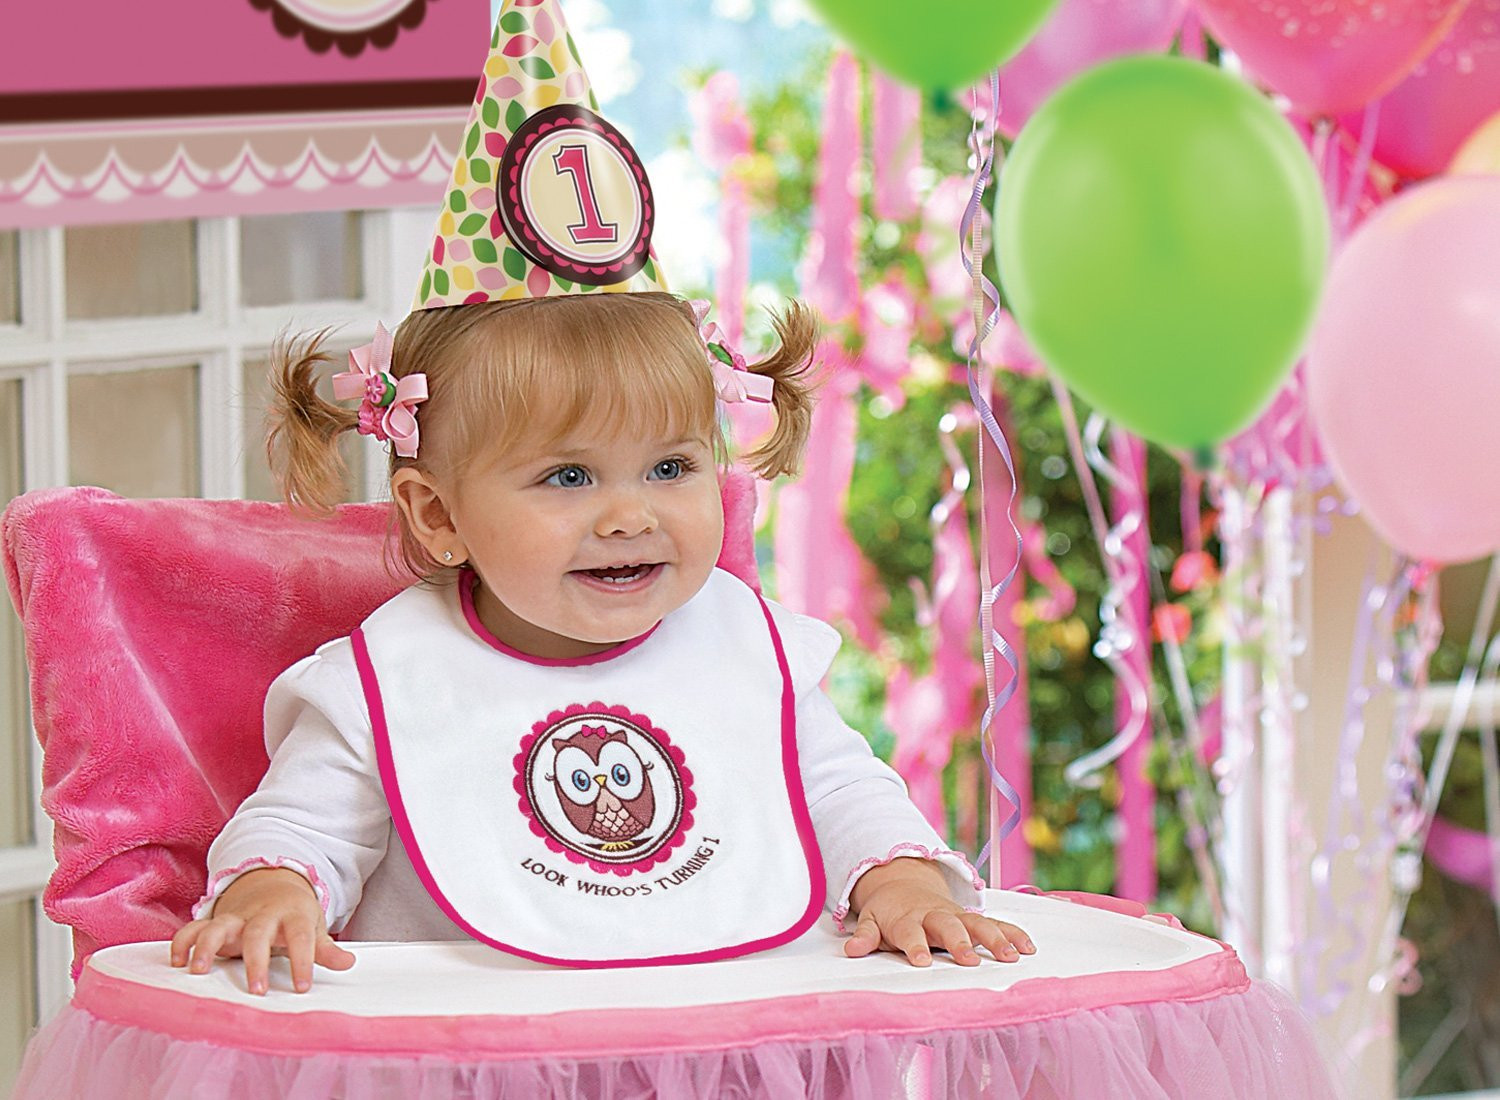 Baby Girls 1St Birthday Party Ideas
 22 Fun Ideas For Your Baby Girl s First Birthday Shoot